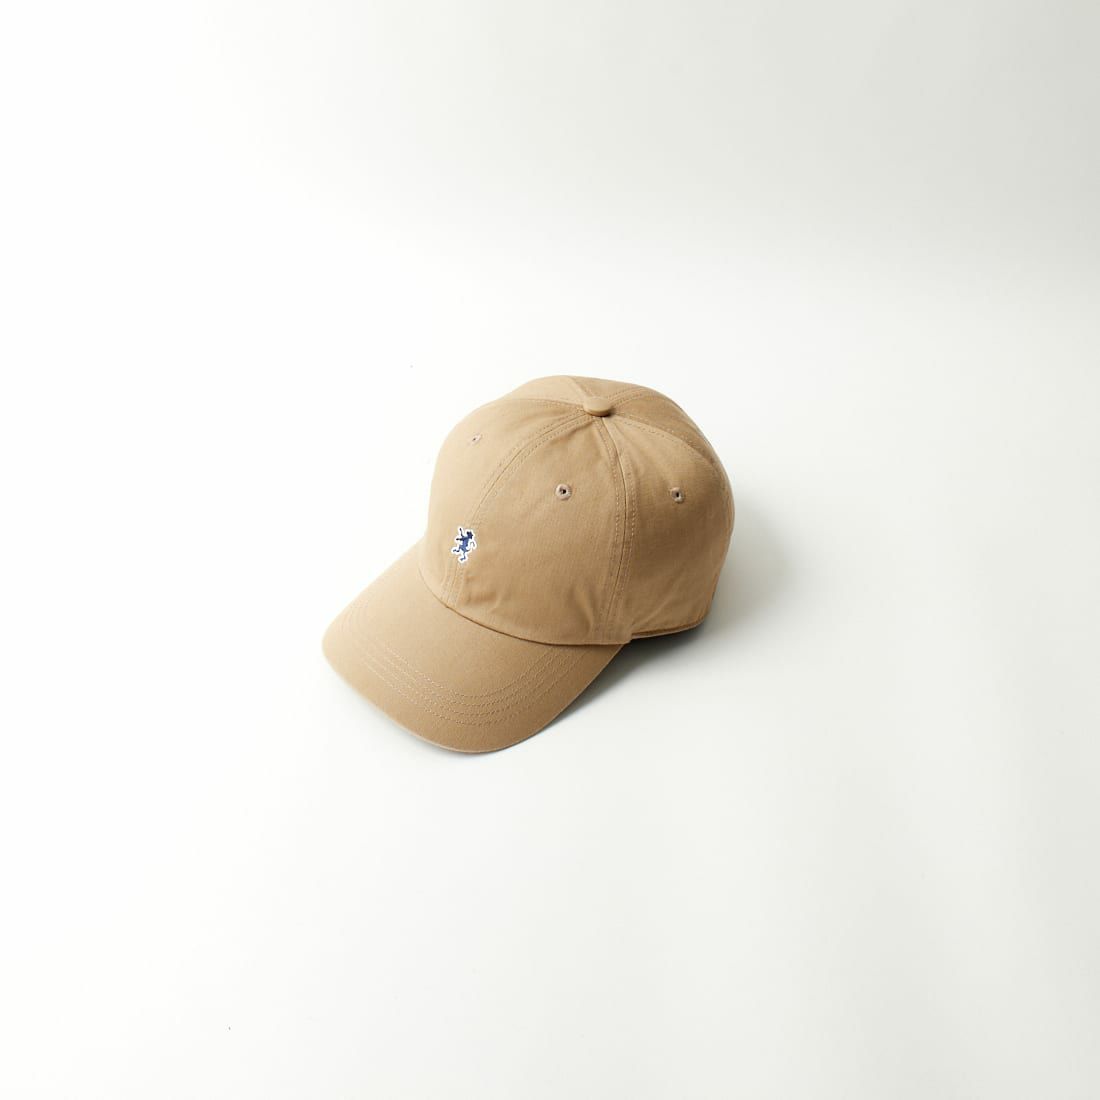 Gymphlex [ジムフレックス] チノクロス 6パネルキャップ [GY-H0253] BEIGE